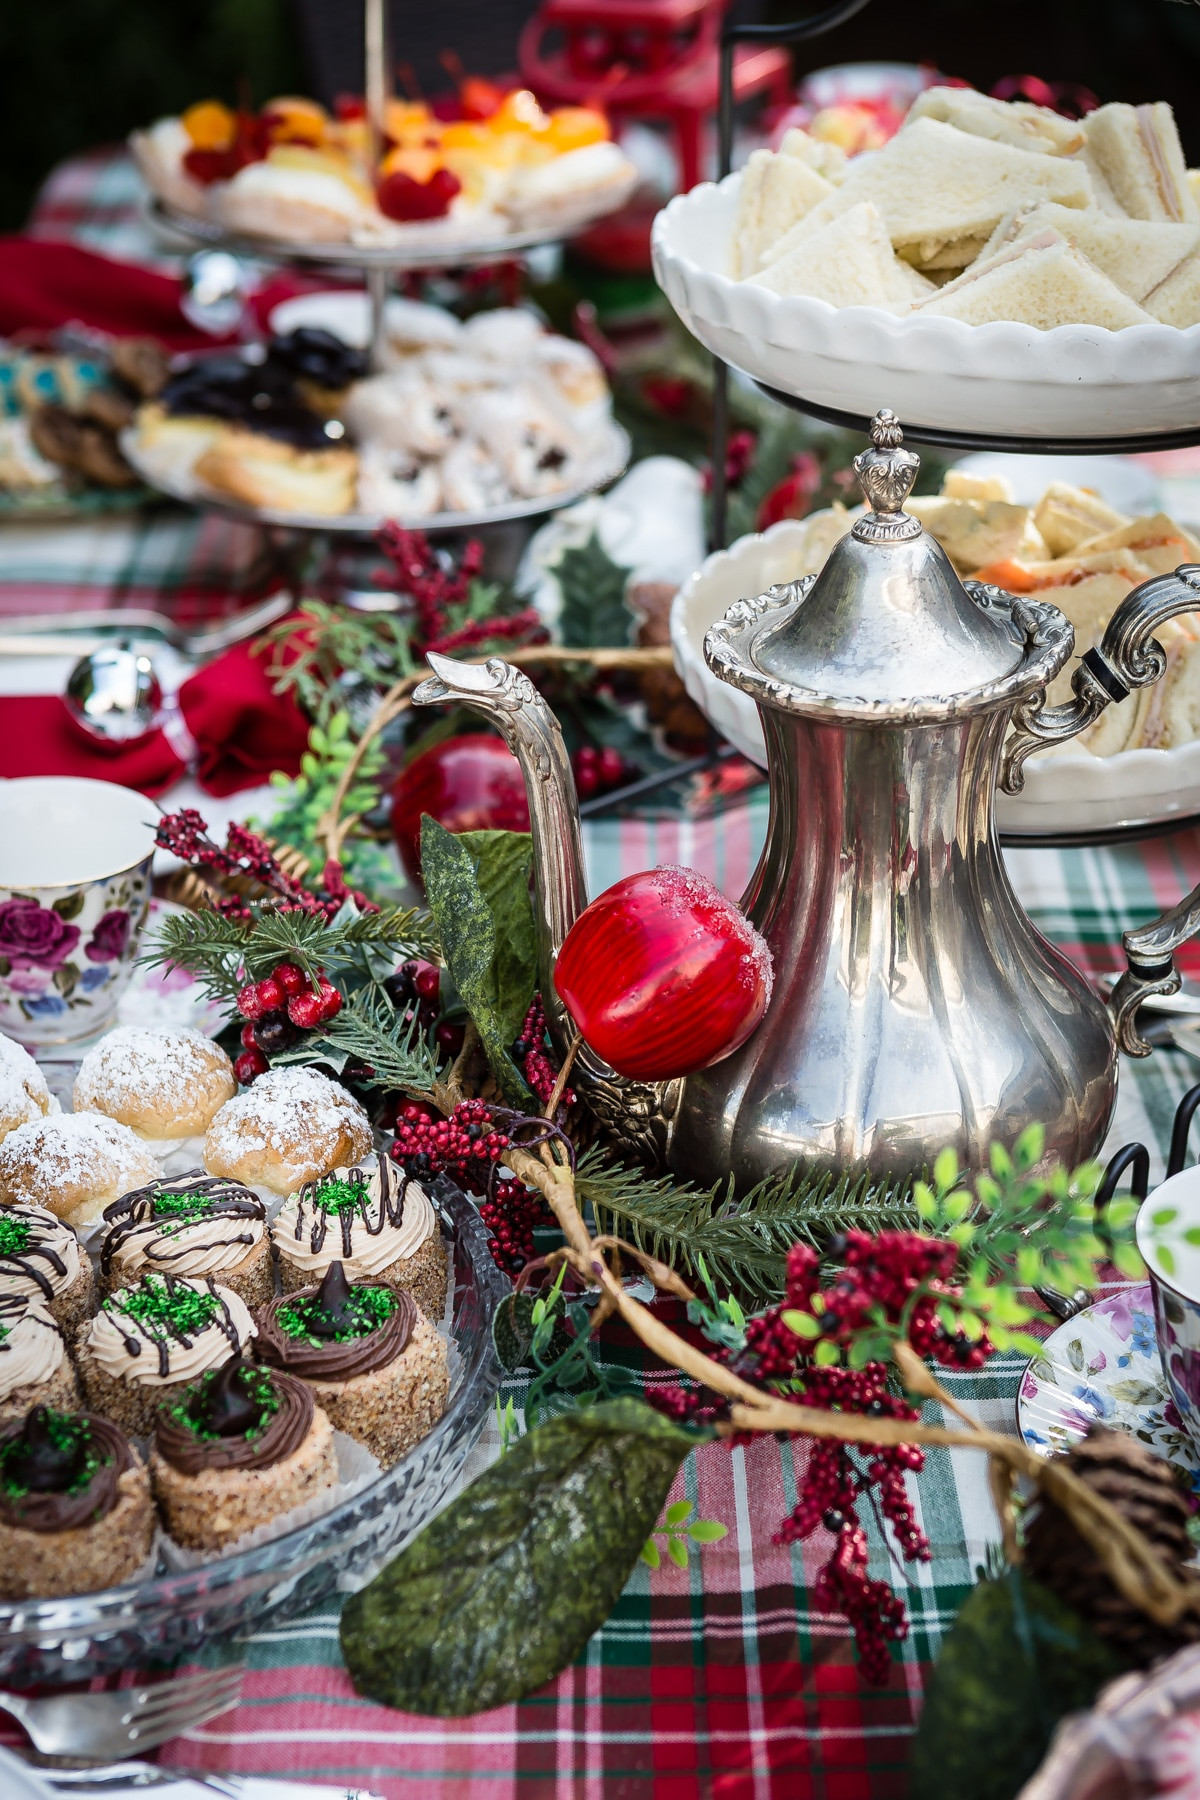 Christmas Tea Party Ideas
 How To Host a Perfect Christmas Tea Party Foodness Gracious